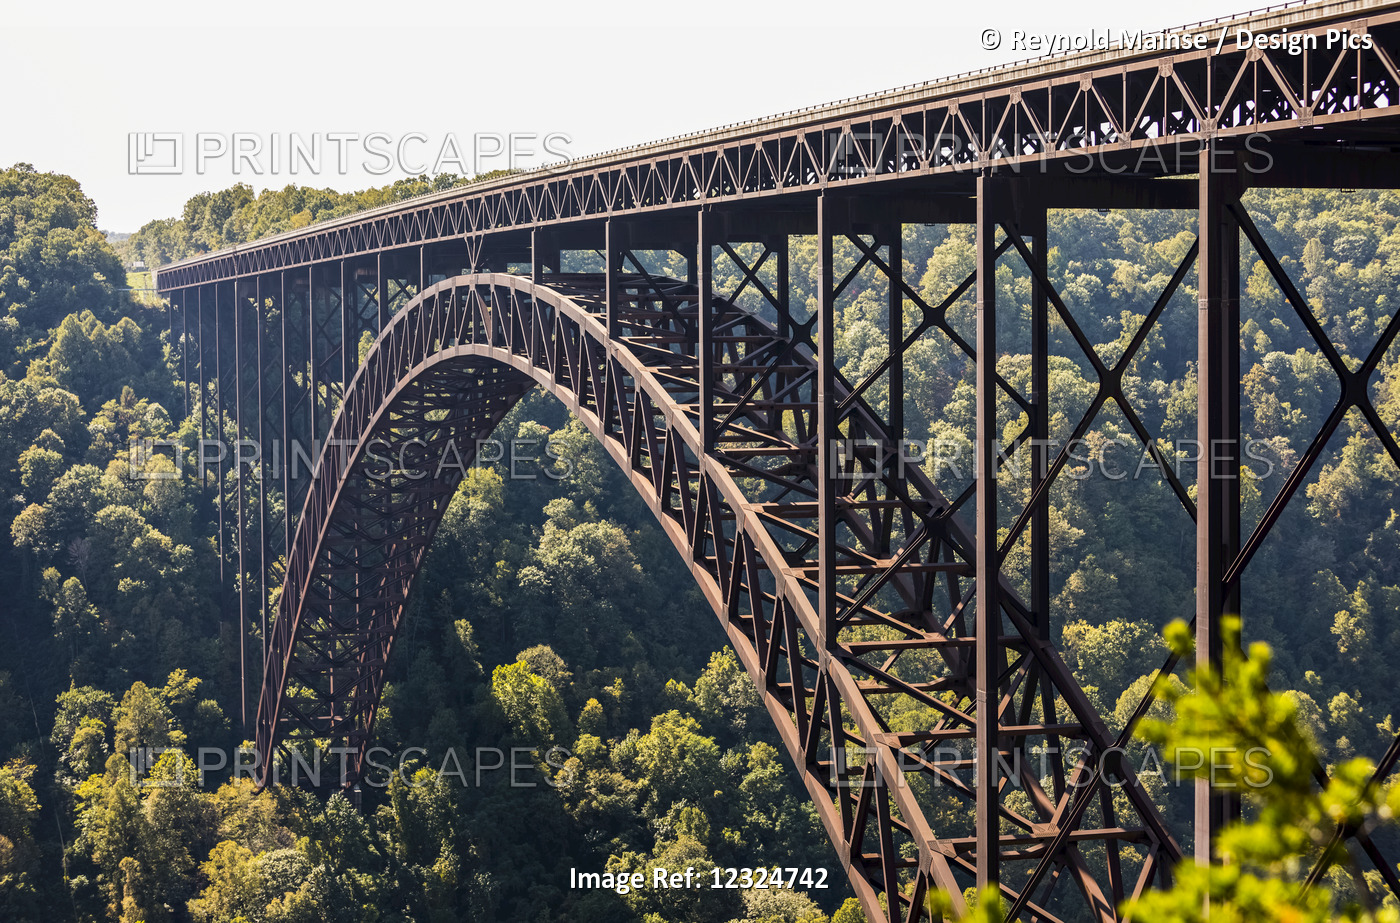 The New River Gorge Bridge Is A Steel Arch Bridge 3,030 Feet Long Over The New ...